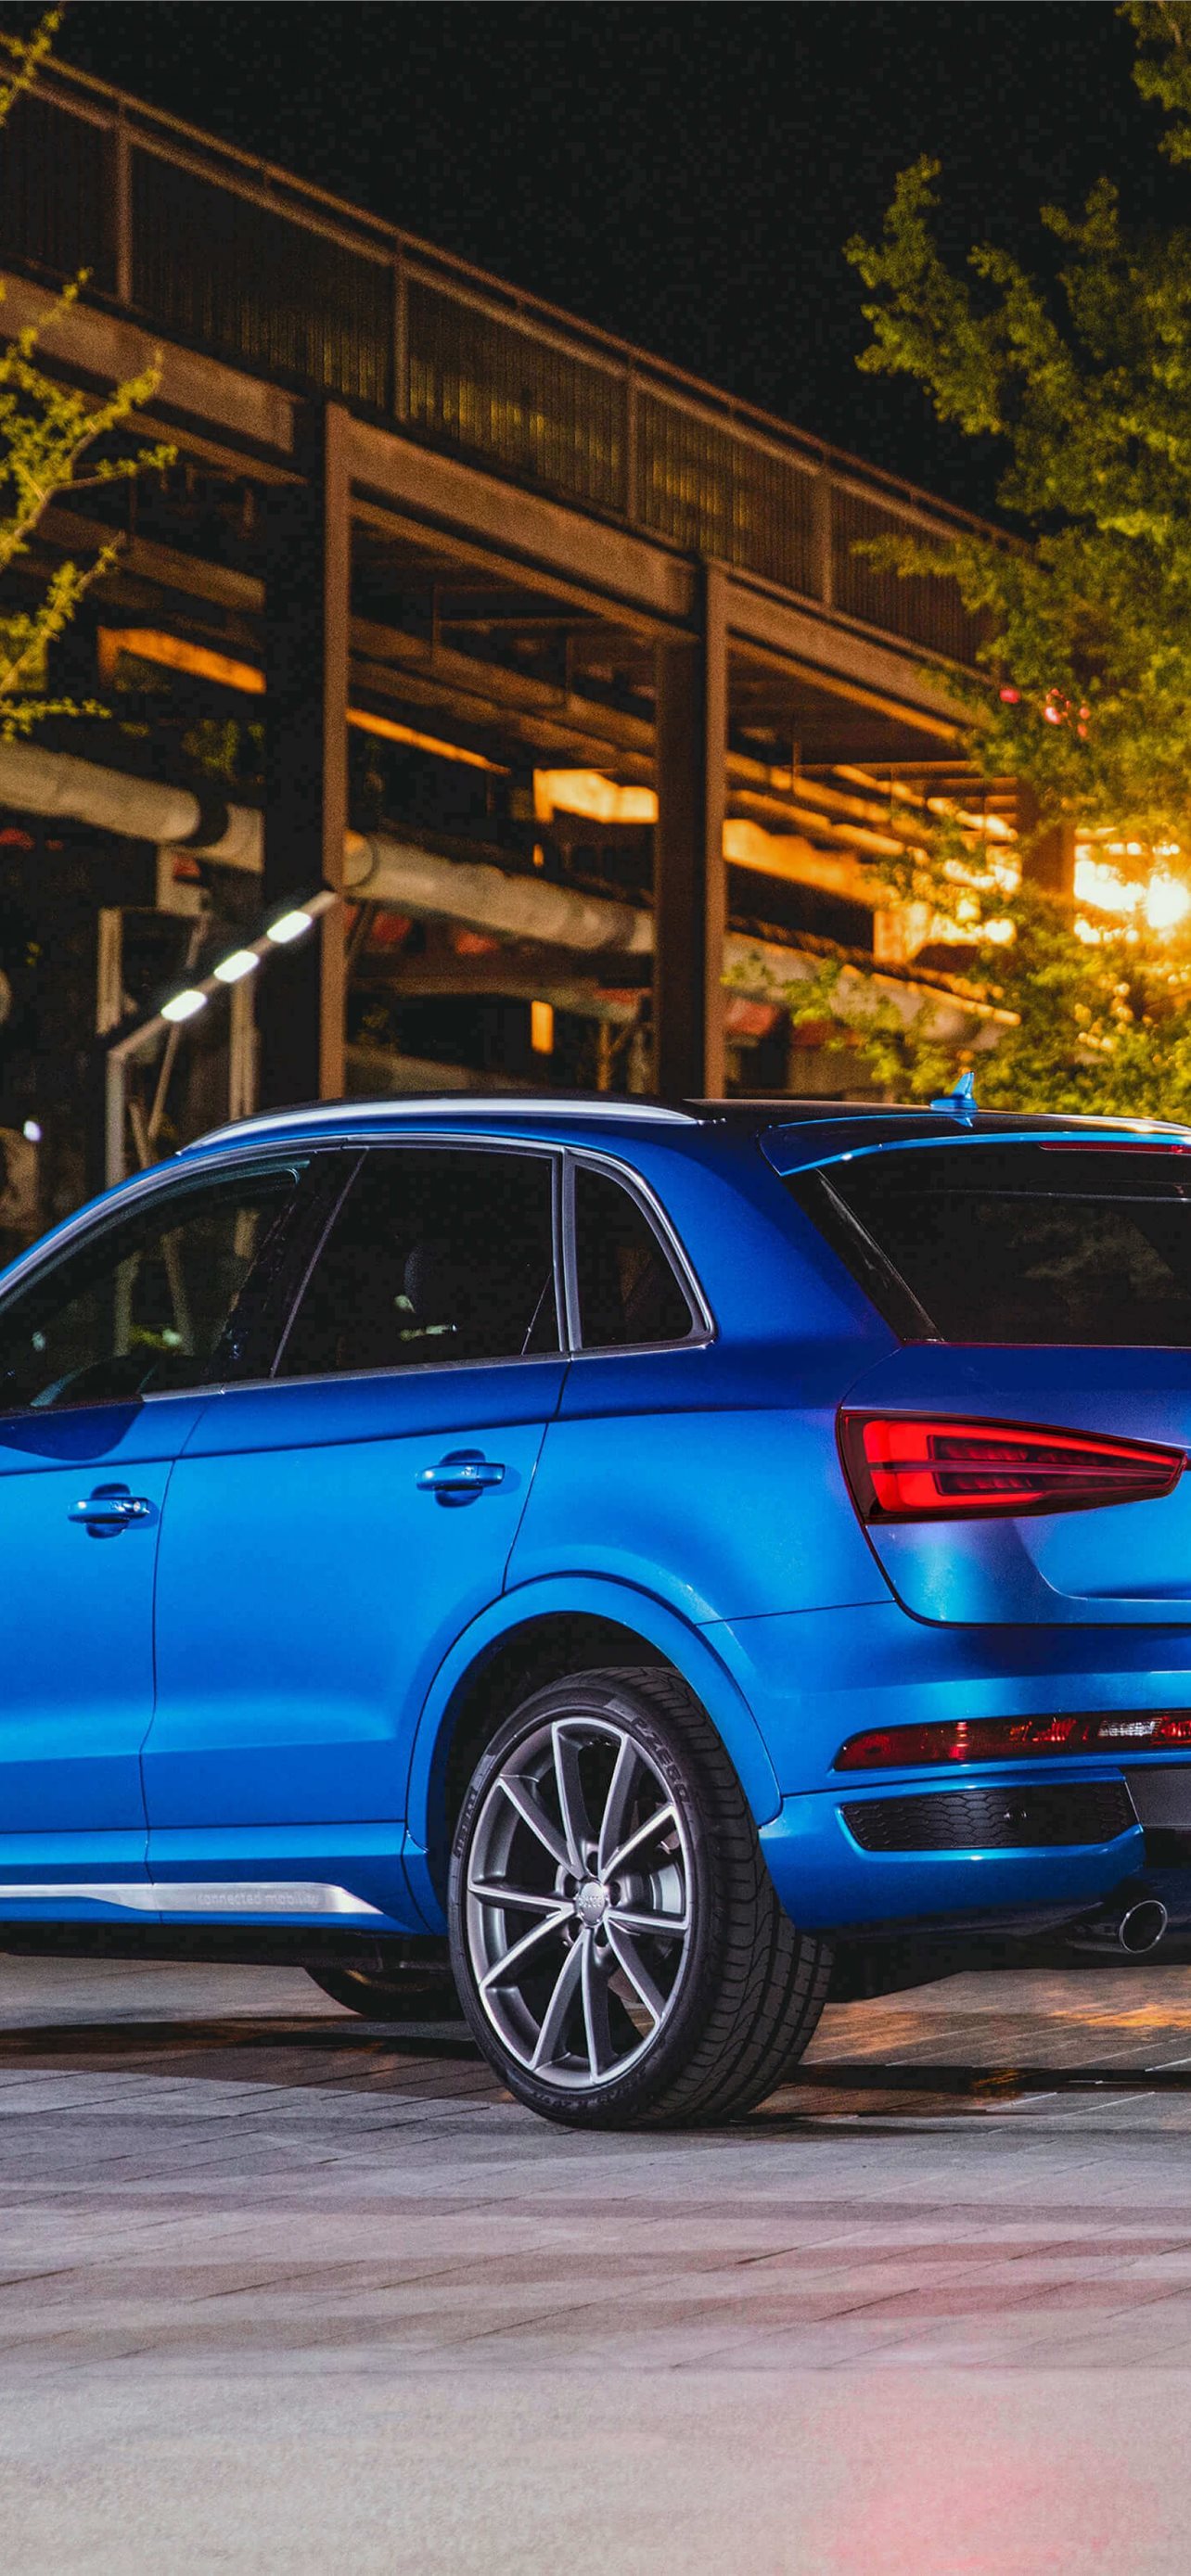 audi q3 iPhone Wallpapers Free Download